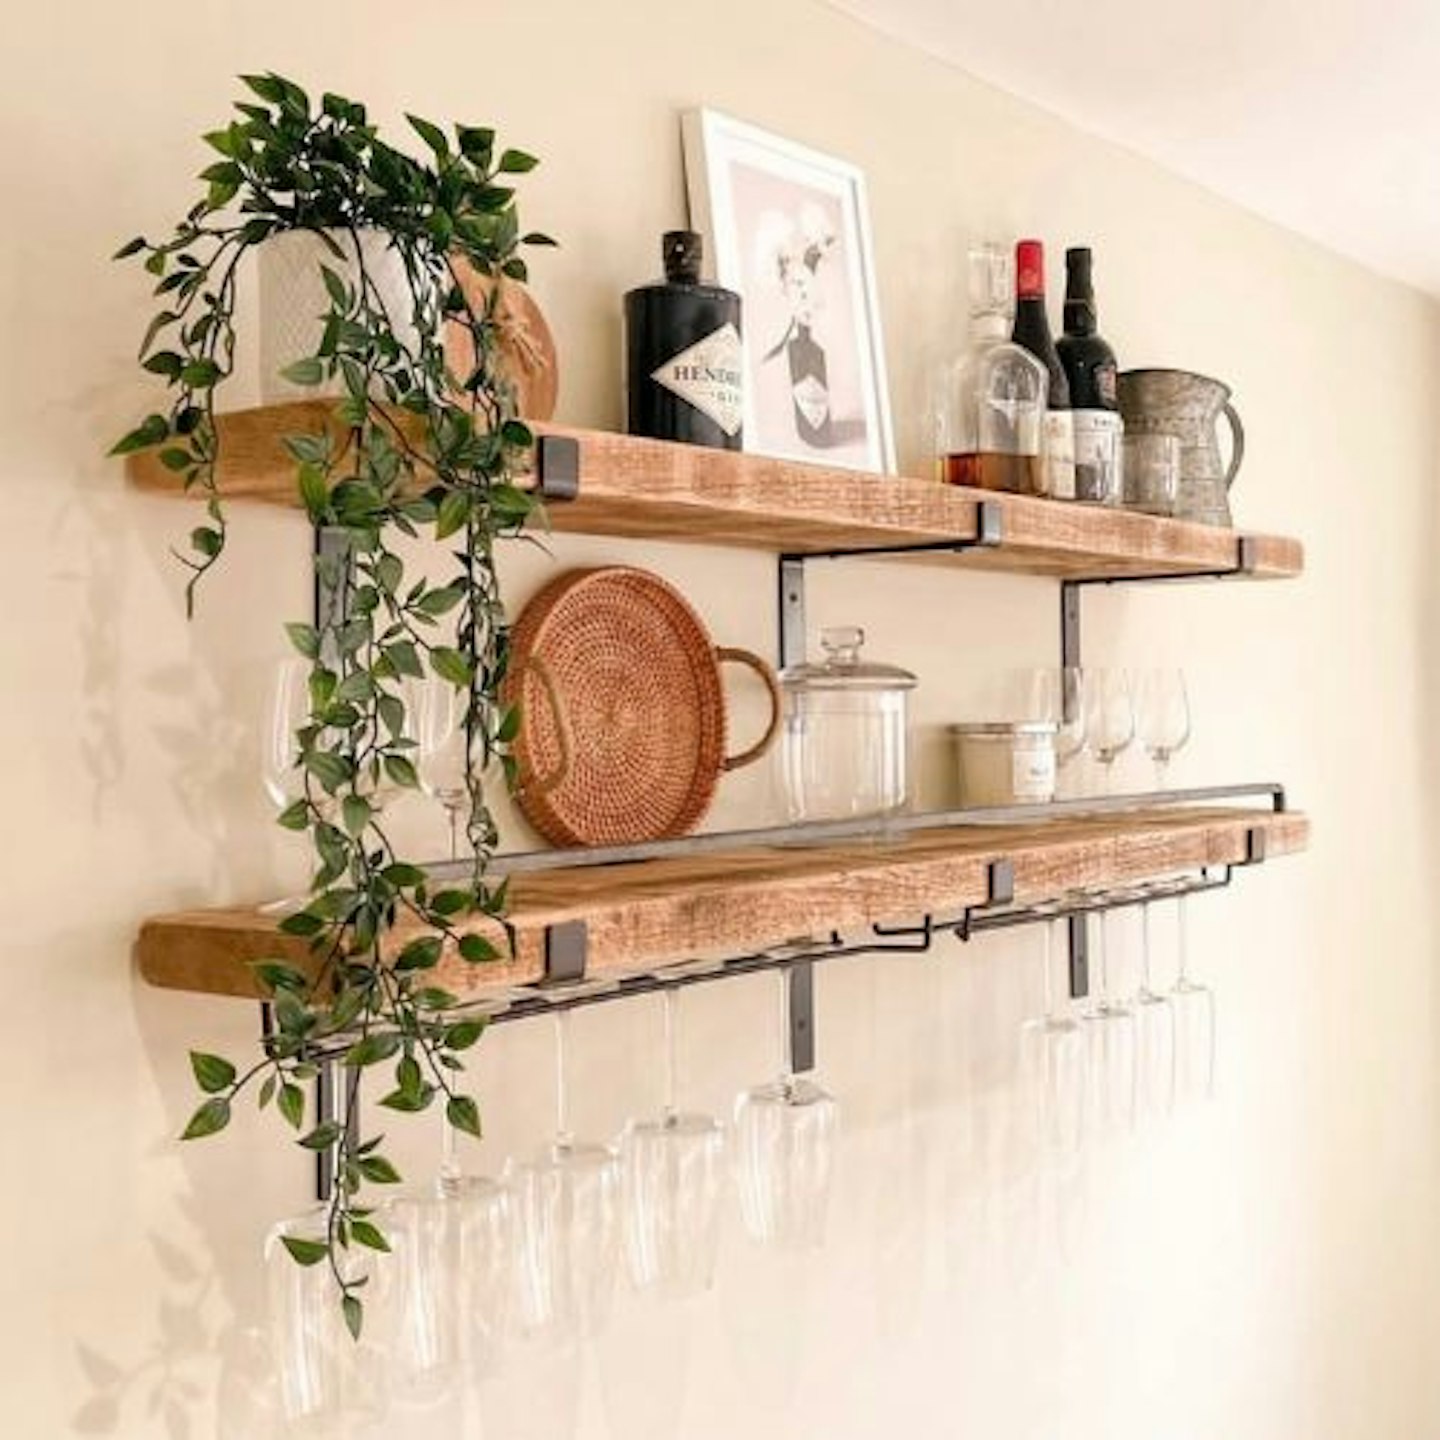 2 x Shelves with Double Wine Glass Holder and Steel Bar